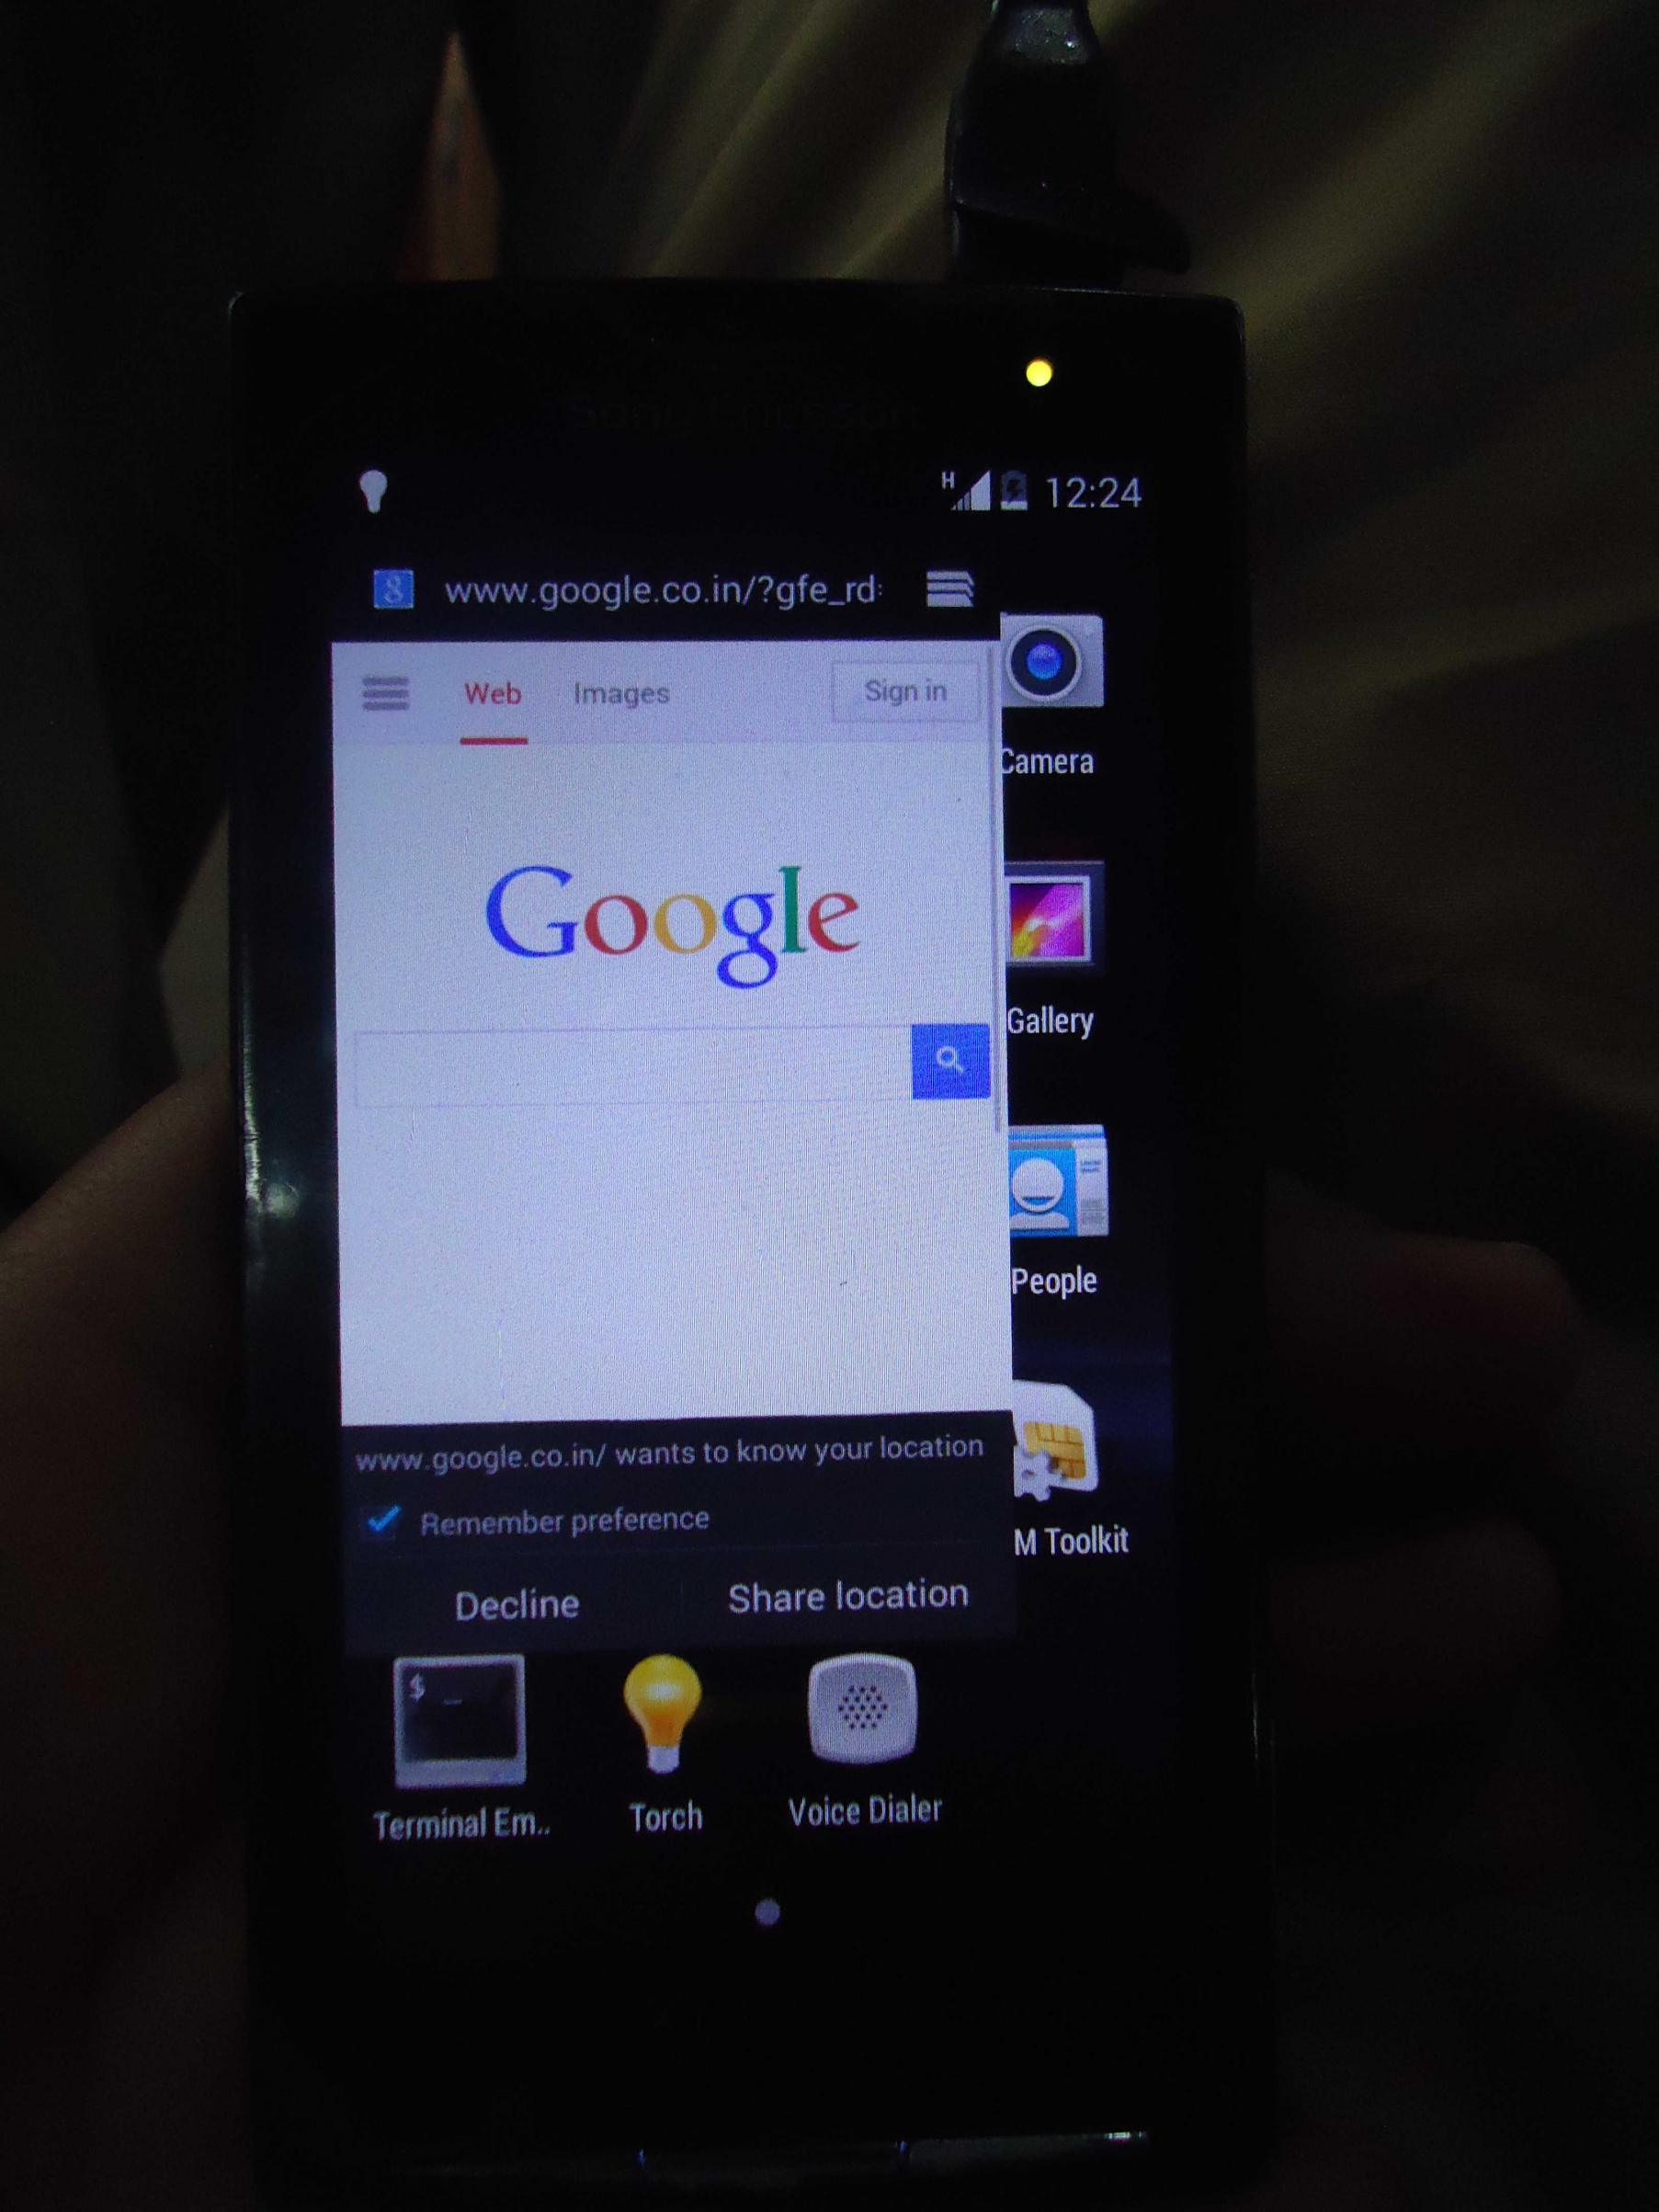 Xperia X10 KitKat 4.4.2 Browser Loads